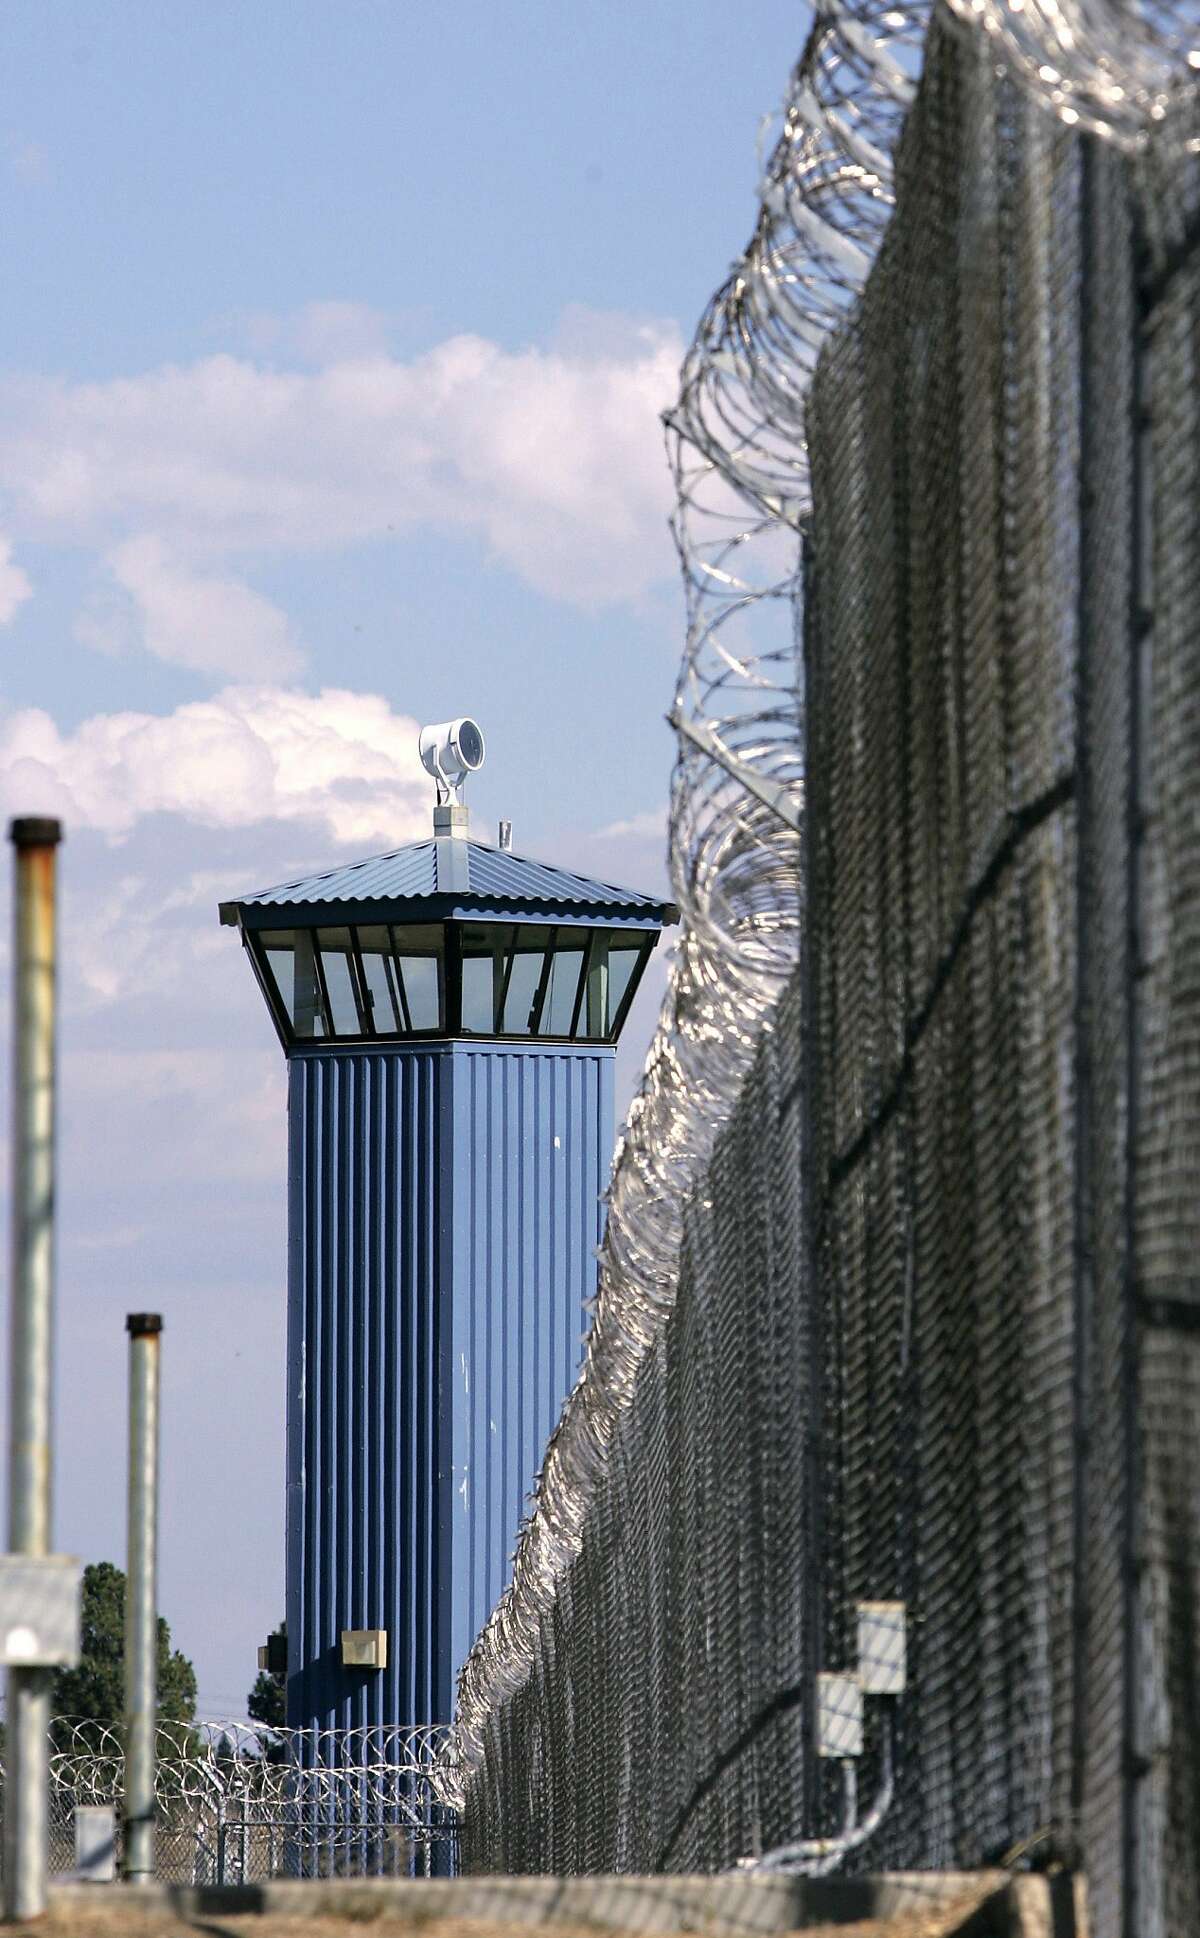 FILE - In this Aug. 31, 2007 file photo, a guard tower stands behind the wire fence that surrounds California State Prison, Sacramento, in Folsom, Calif. Corrections officials say one inmate is dead and several others have been taken to an outside hospital to be treated for stab winds after a riot broke out at one of the prison's exercise yard, Wednesday, Aug. 12, 2015.(AP Photo/Rich Pedroncelli, File)